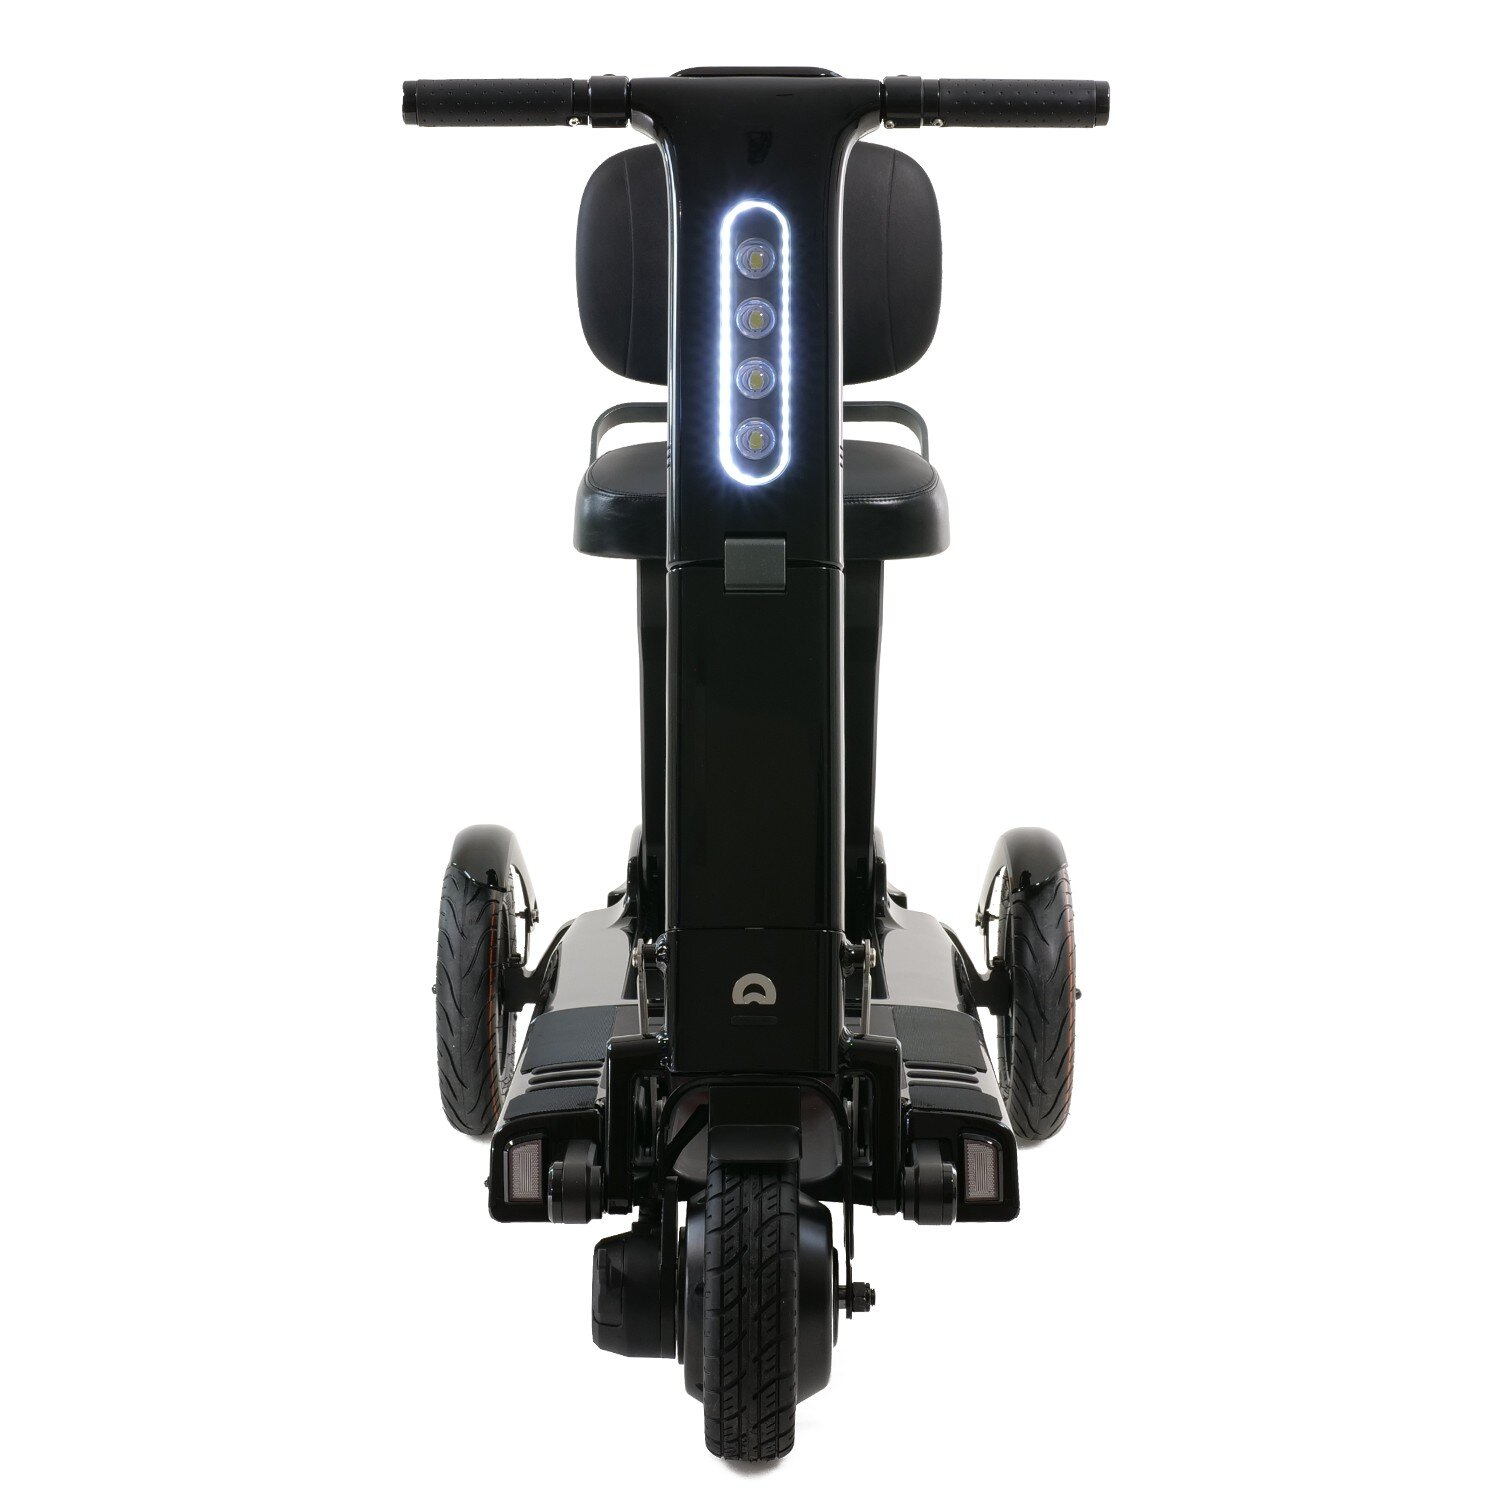 Elscooter Relync R1 - 205Wh